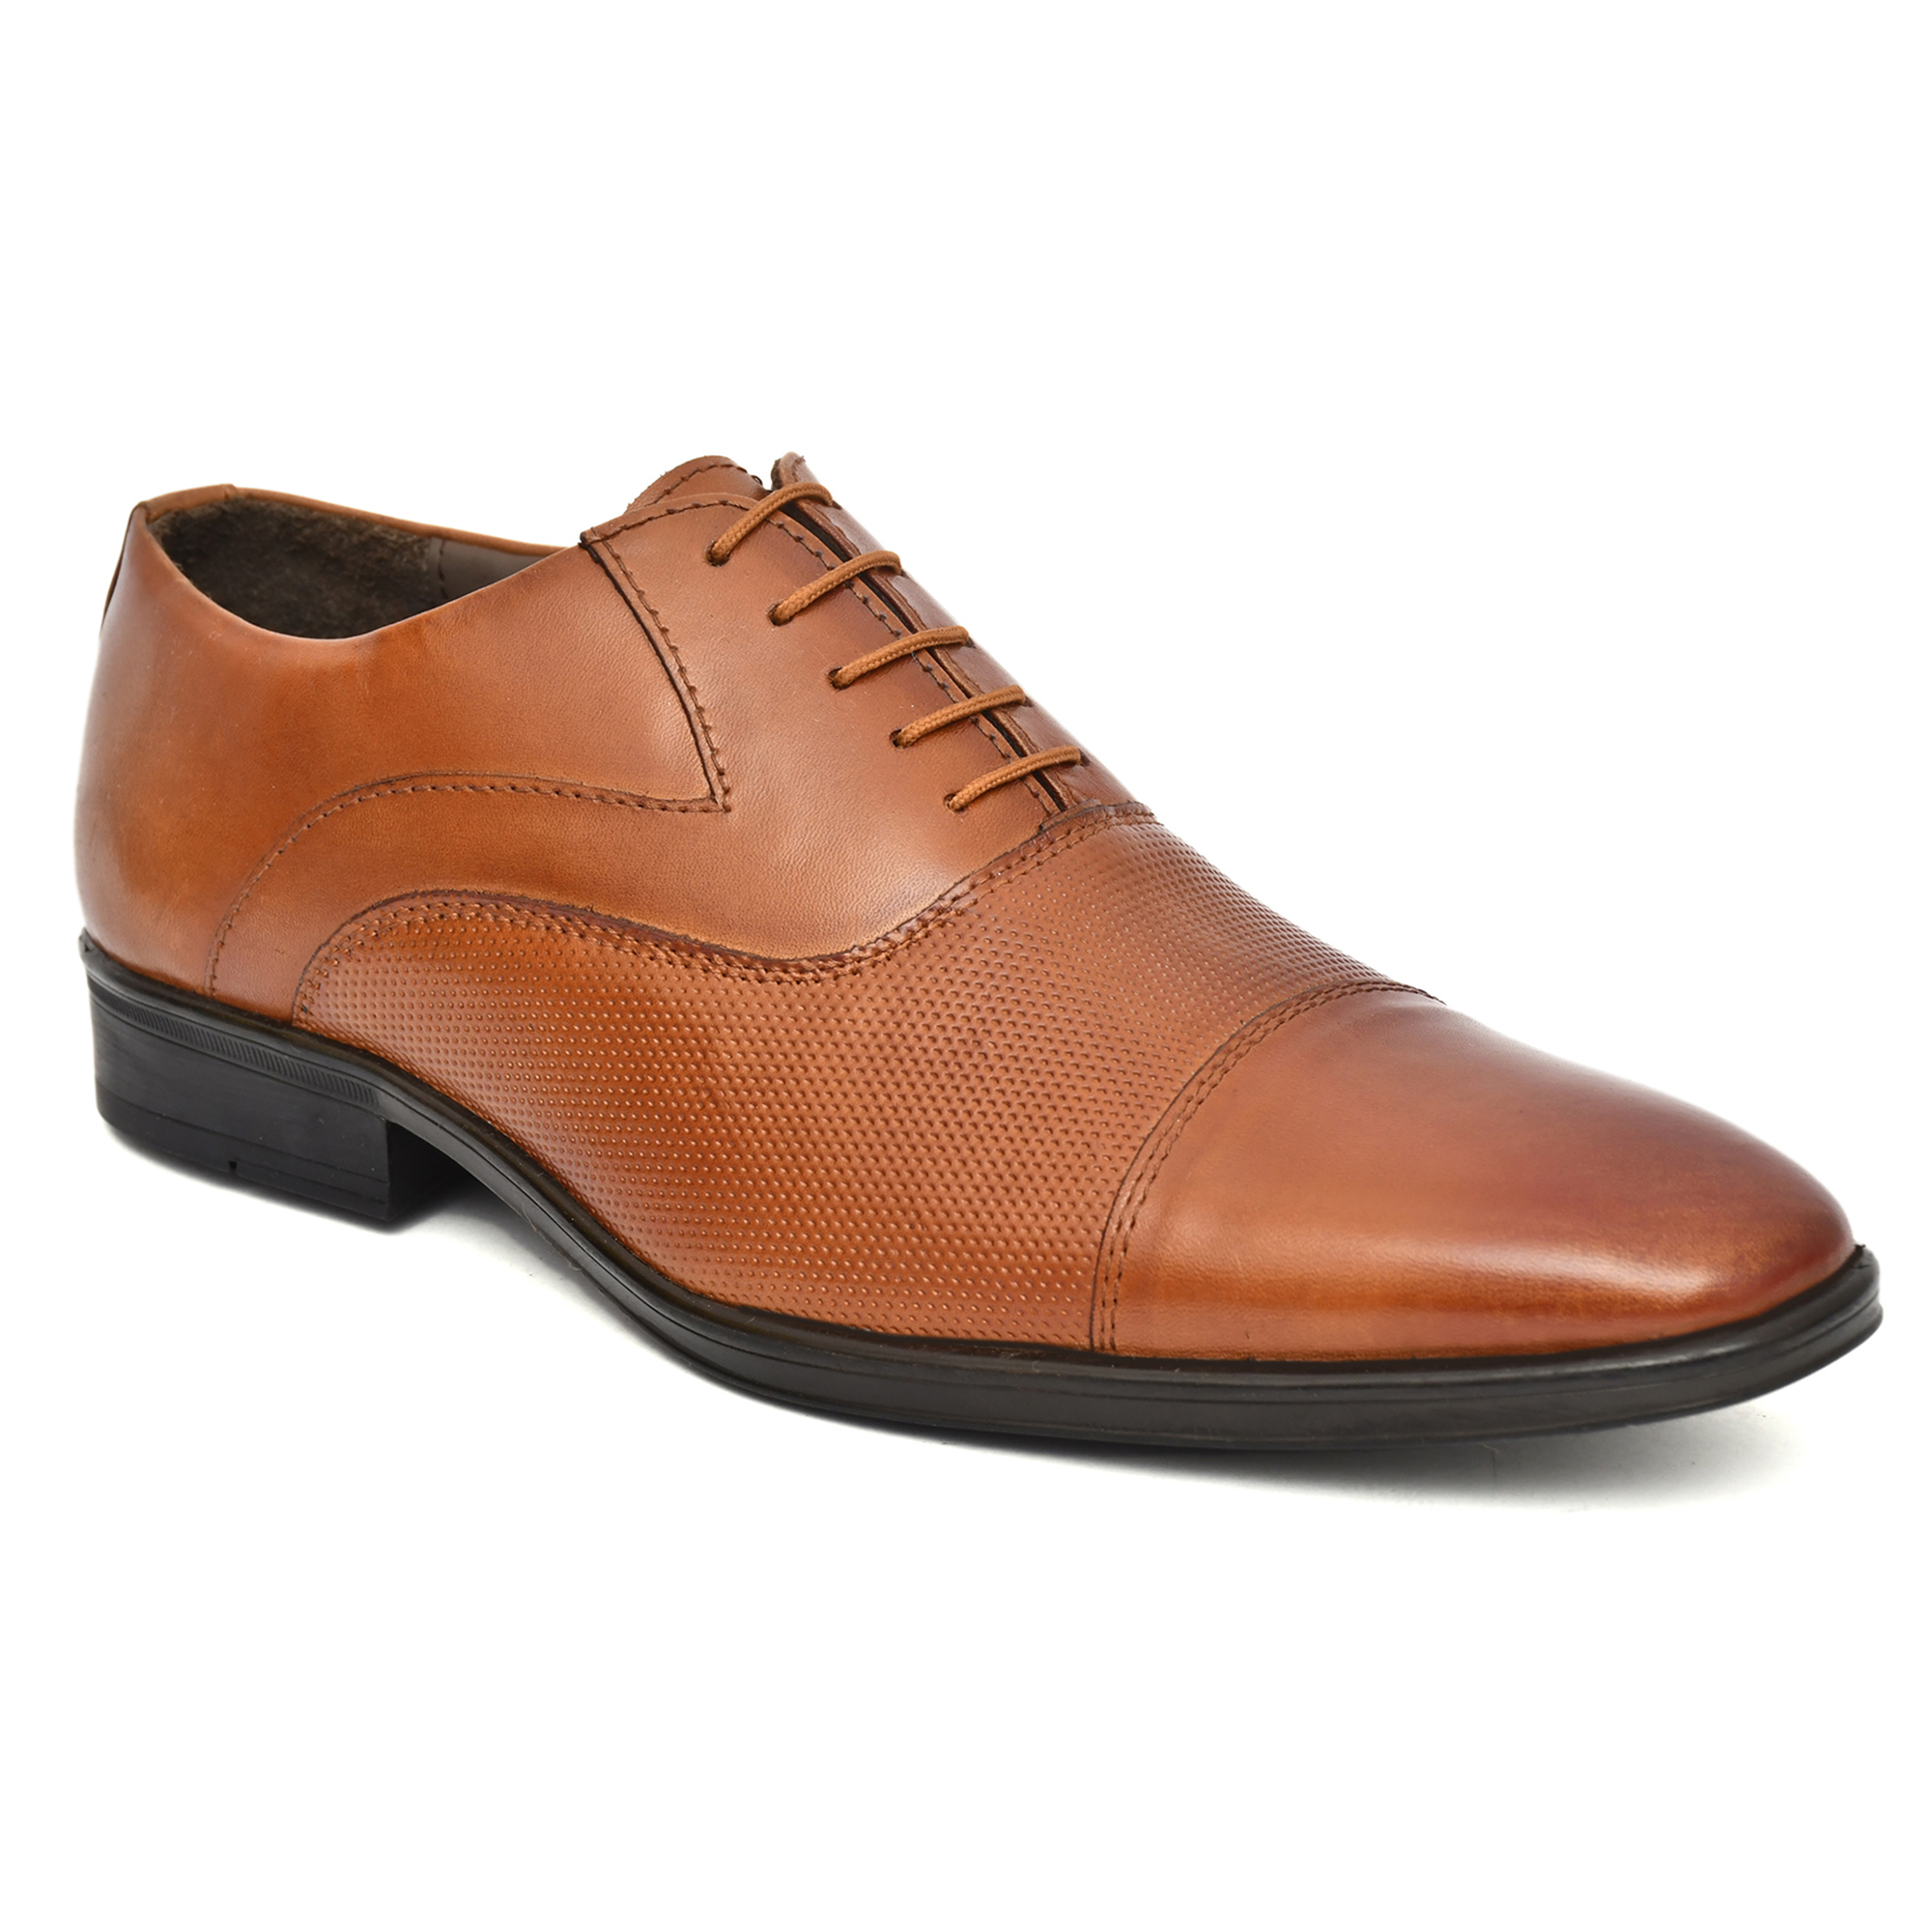 Tan leather Oxford shoes for Men with Memory foam footpad by asm.